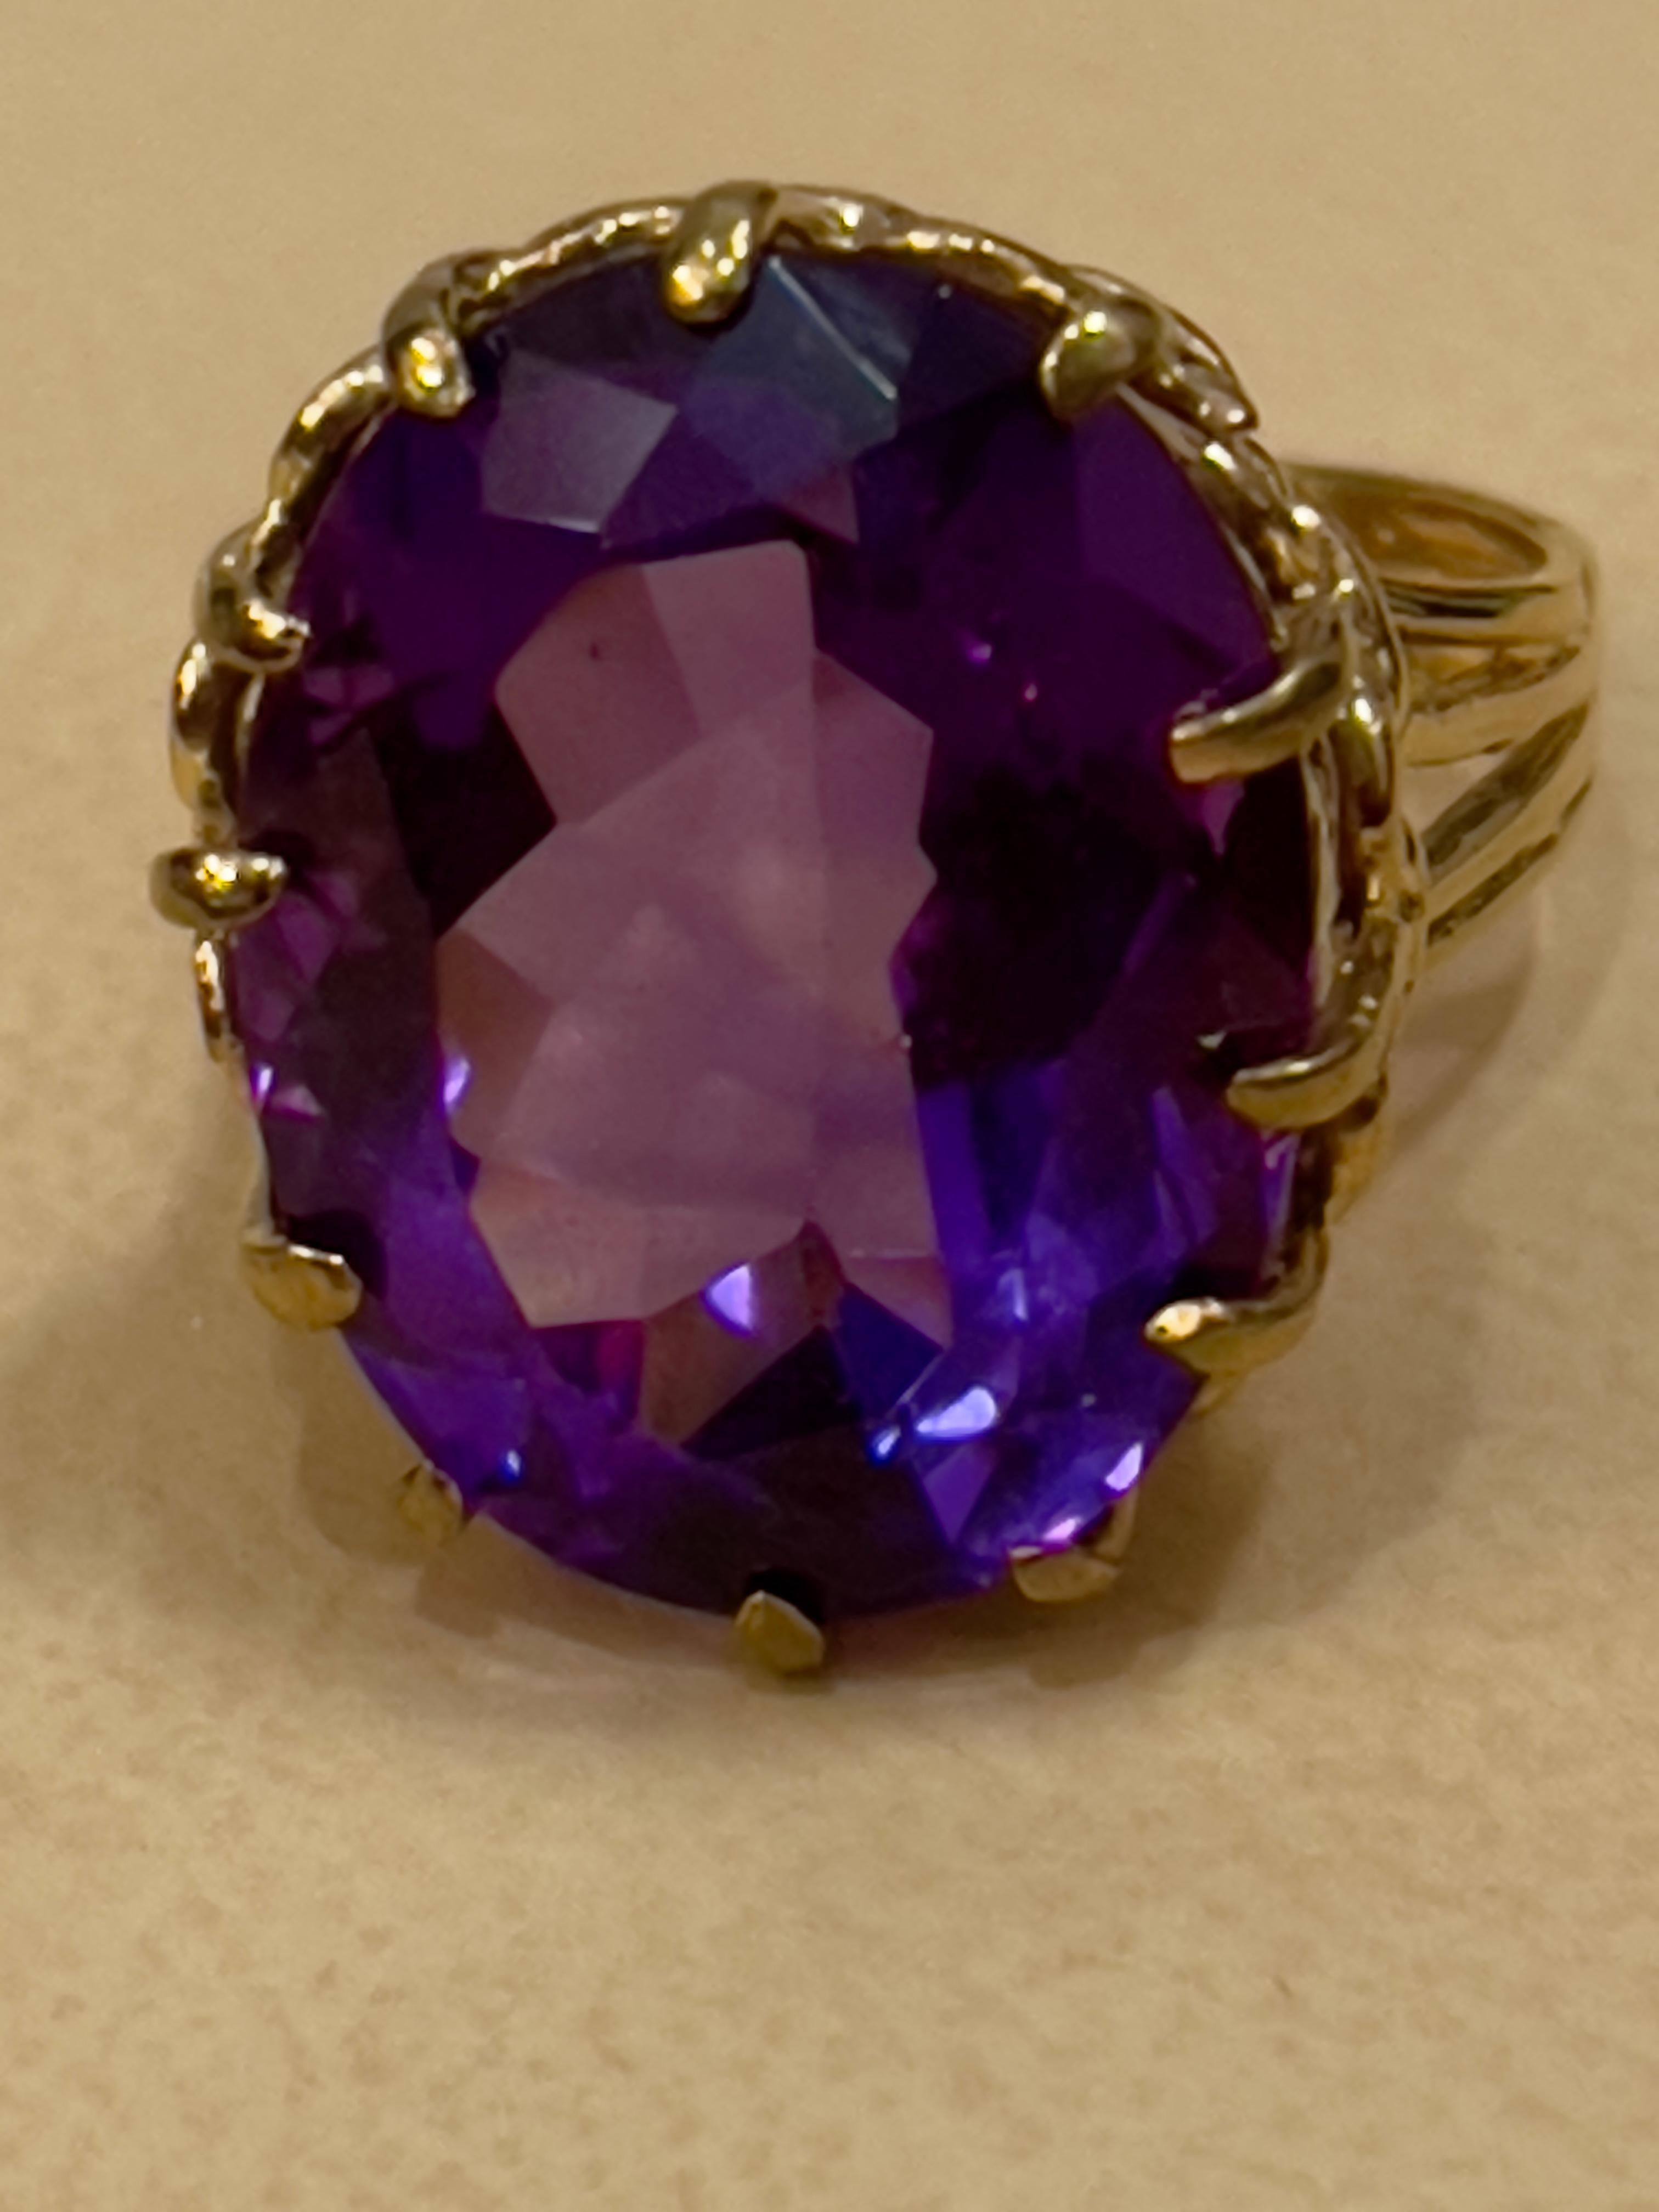 Approximately 15 Carat Beautiful  Amethyst Cocktail Ring in 14 Karat Yellow Gold Size 4.5
This is a Beautiful Cocktail ring ring which has a large approximately 15  carat of high quality Amethyst . Color and clarity is extremely nice. Large Oval cut